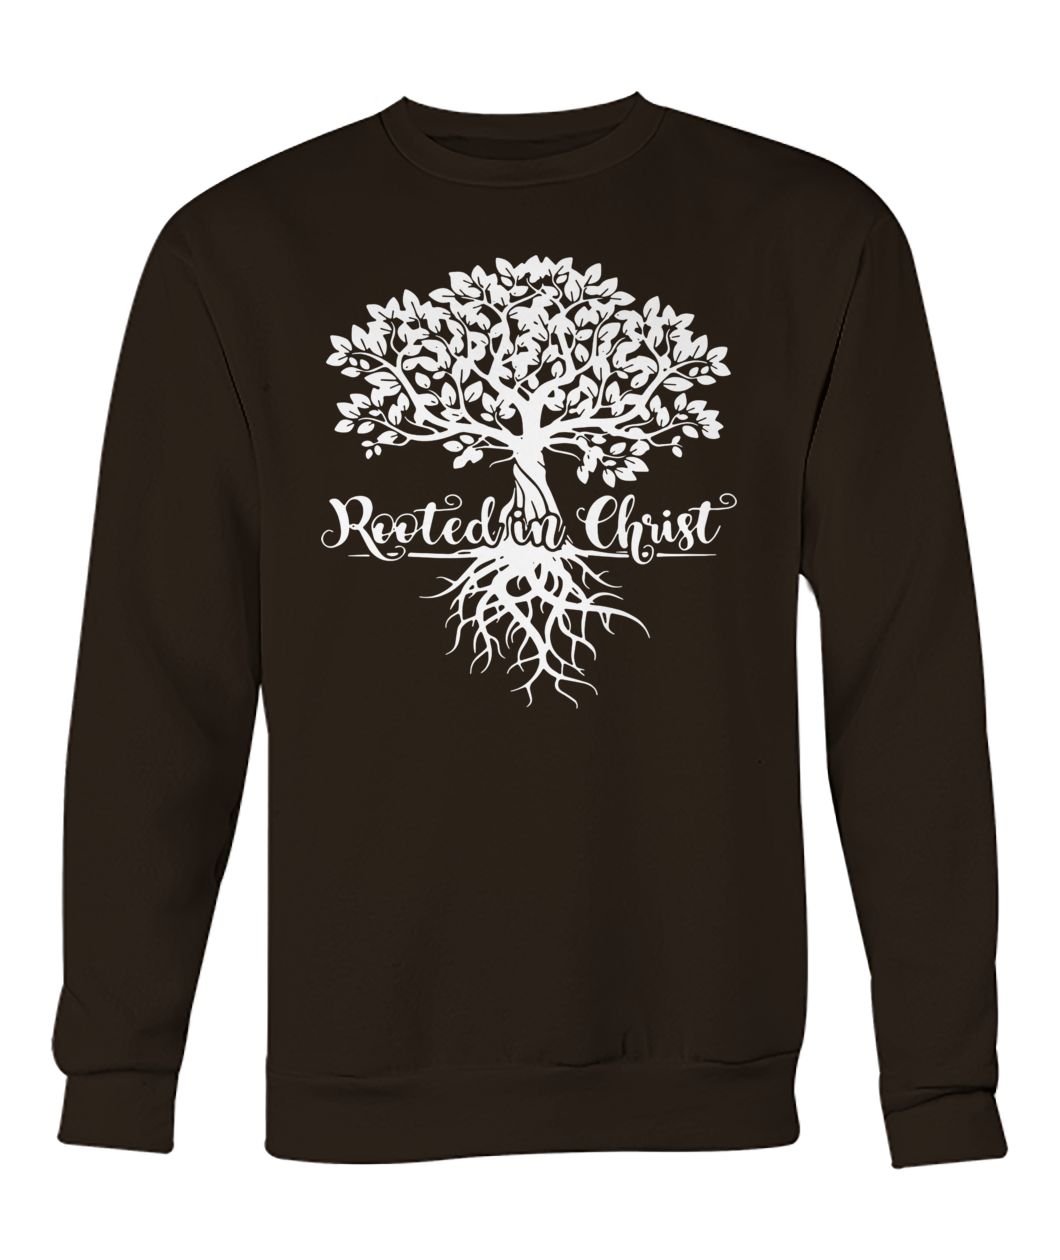 Rooted in christ christian faith and love in God crew neck sweatshirt